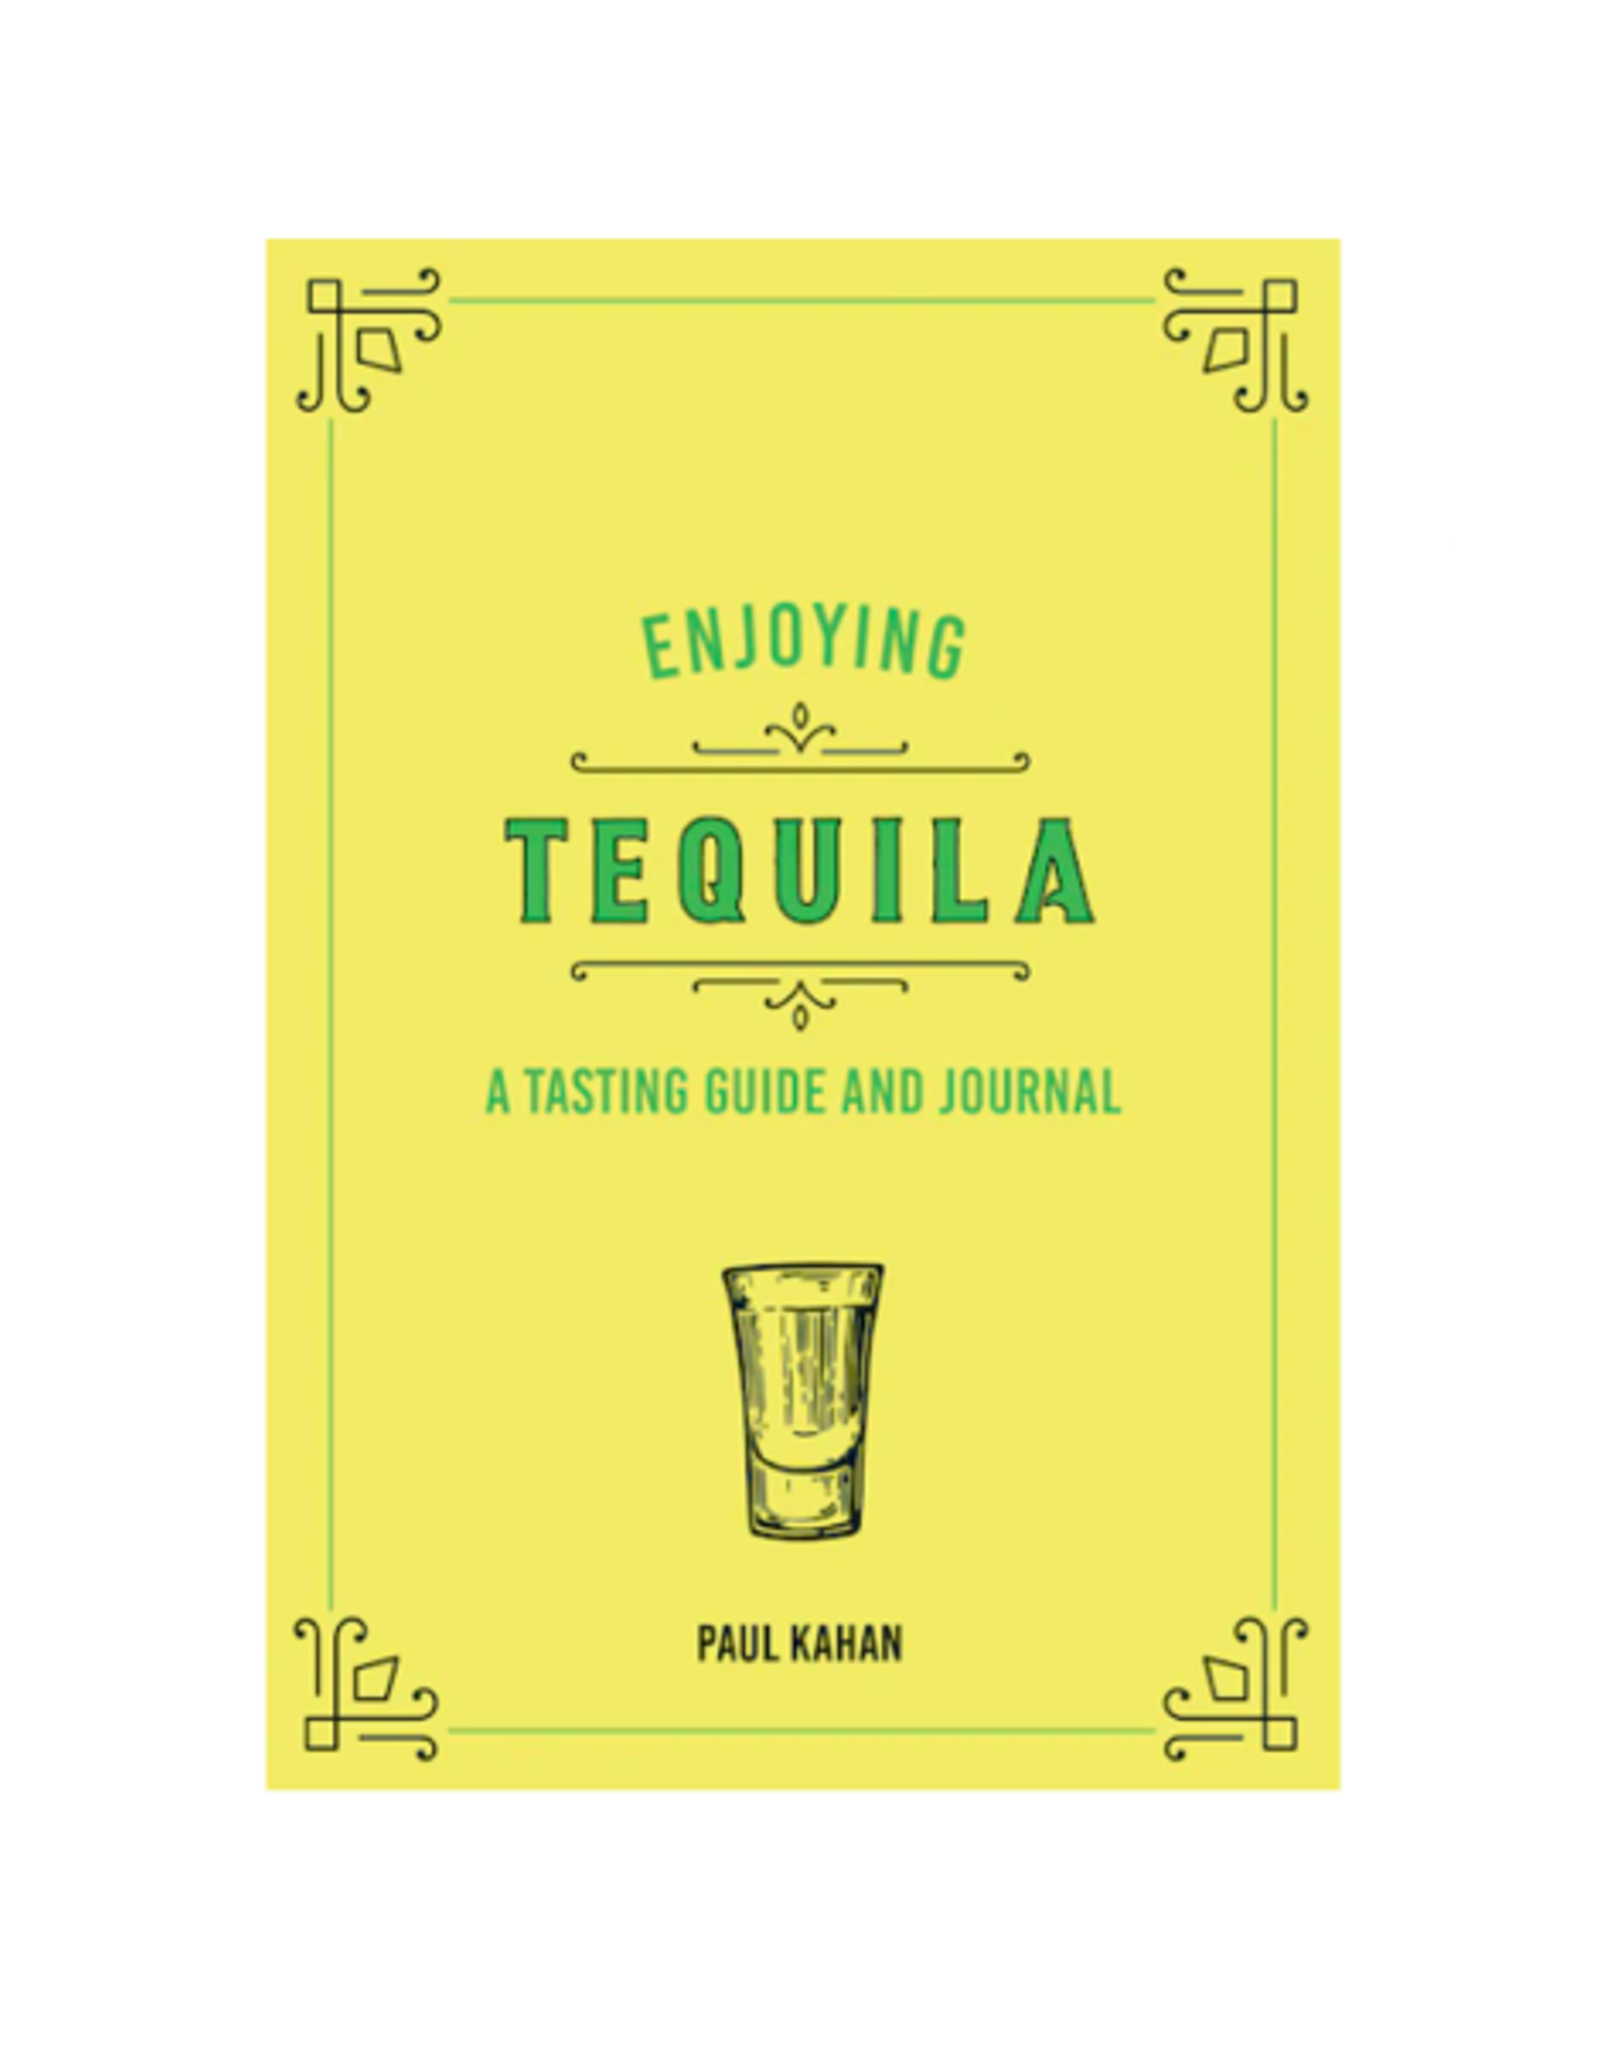 The Independent Mercantile Co. HTE - Hardcover Book / Enjoying Tequila by Paul Kahan